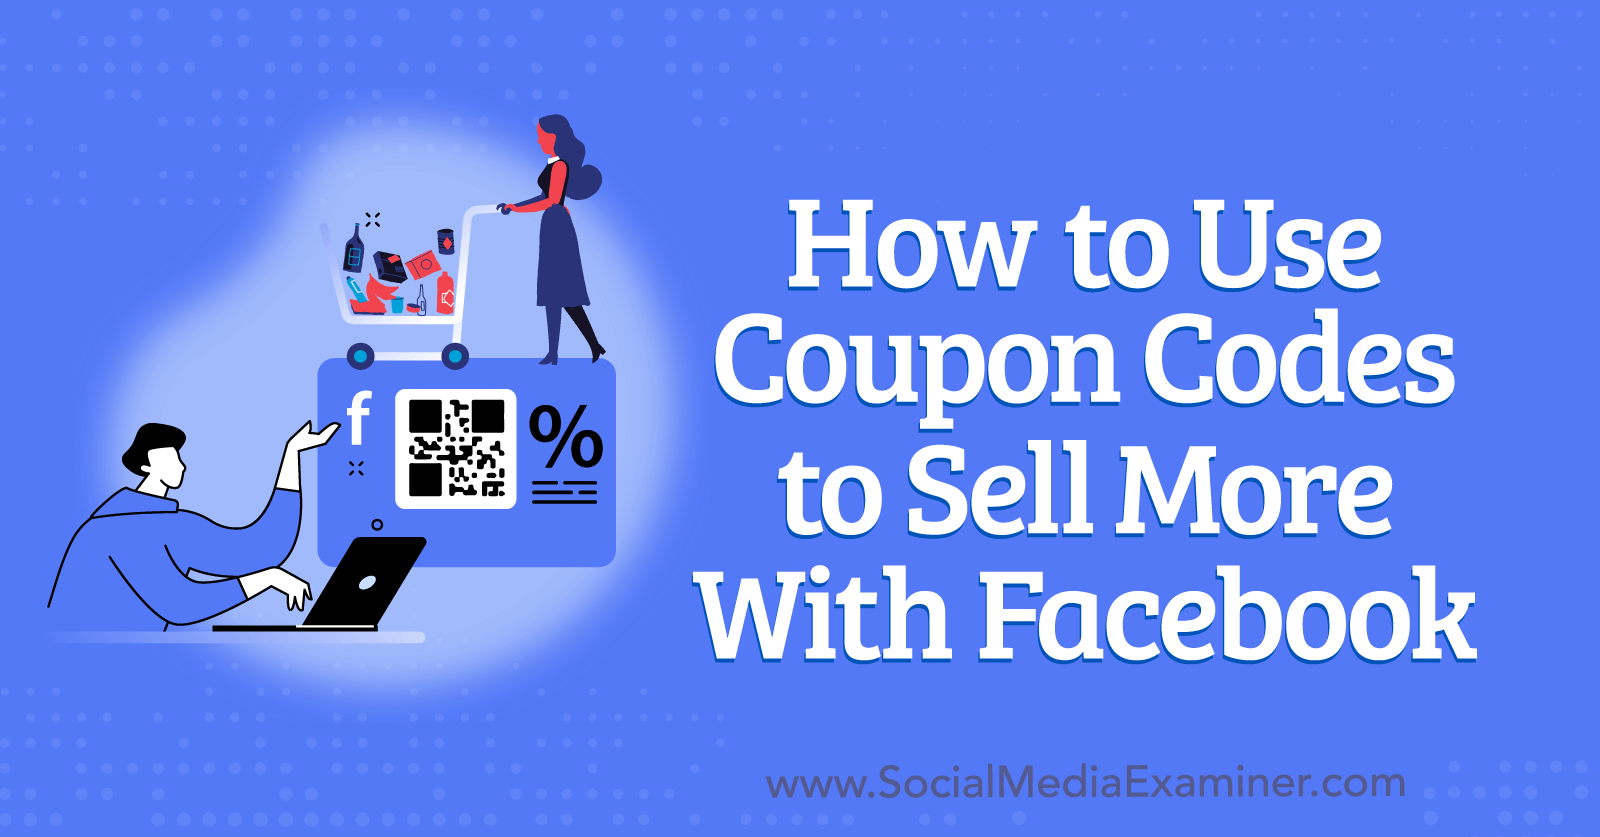 https://www.socialmediaexaminer.com/wp-content/uploads/2022/11/facebook-coupon-codes-how-to-use-for-sales-1600.png